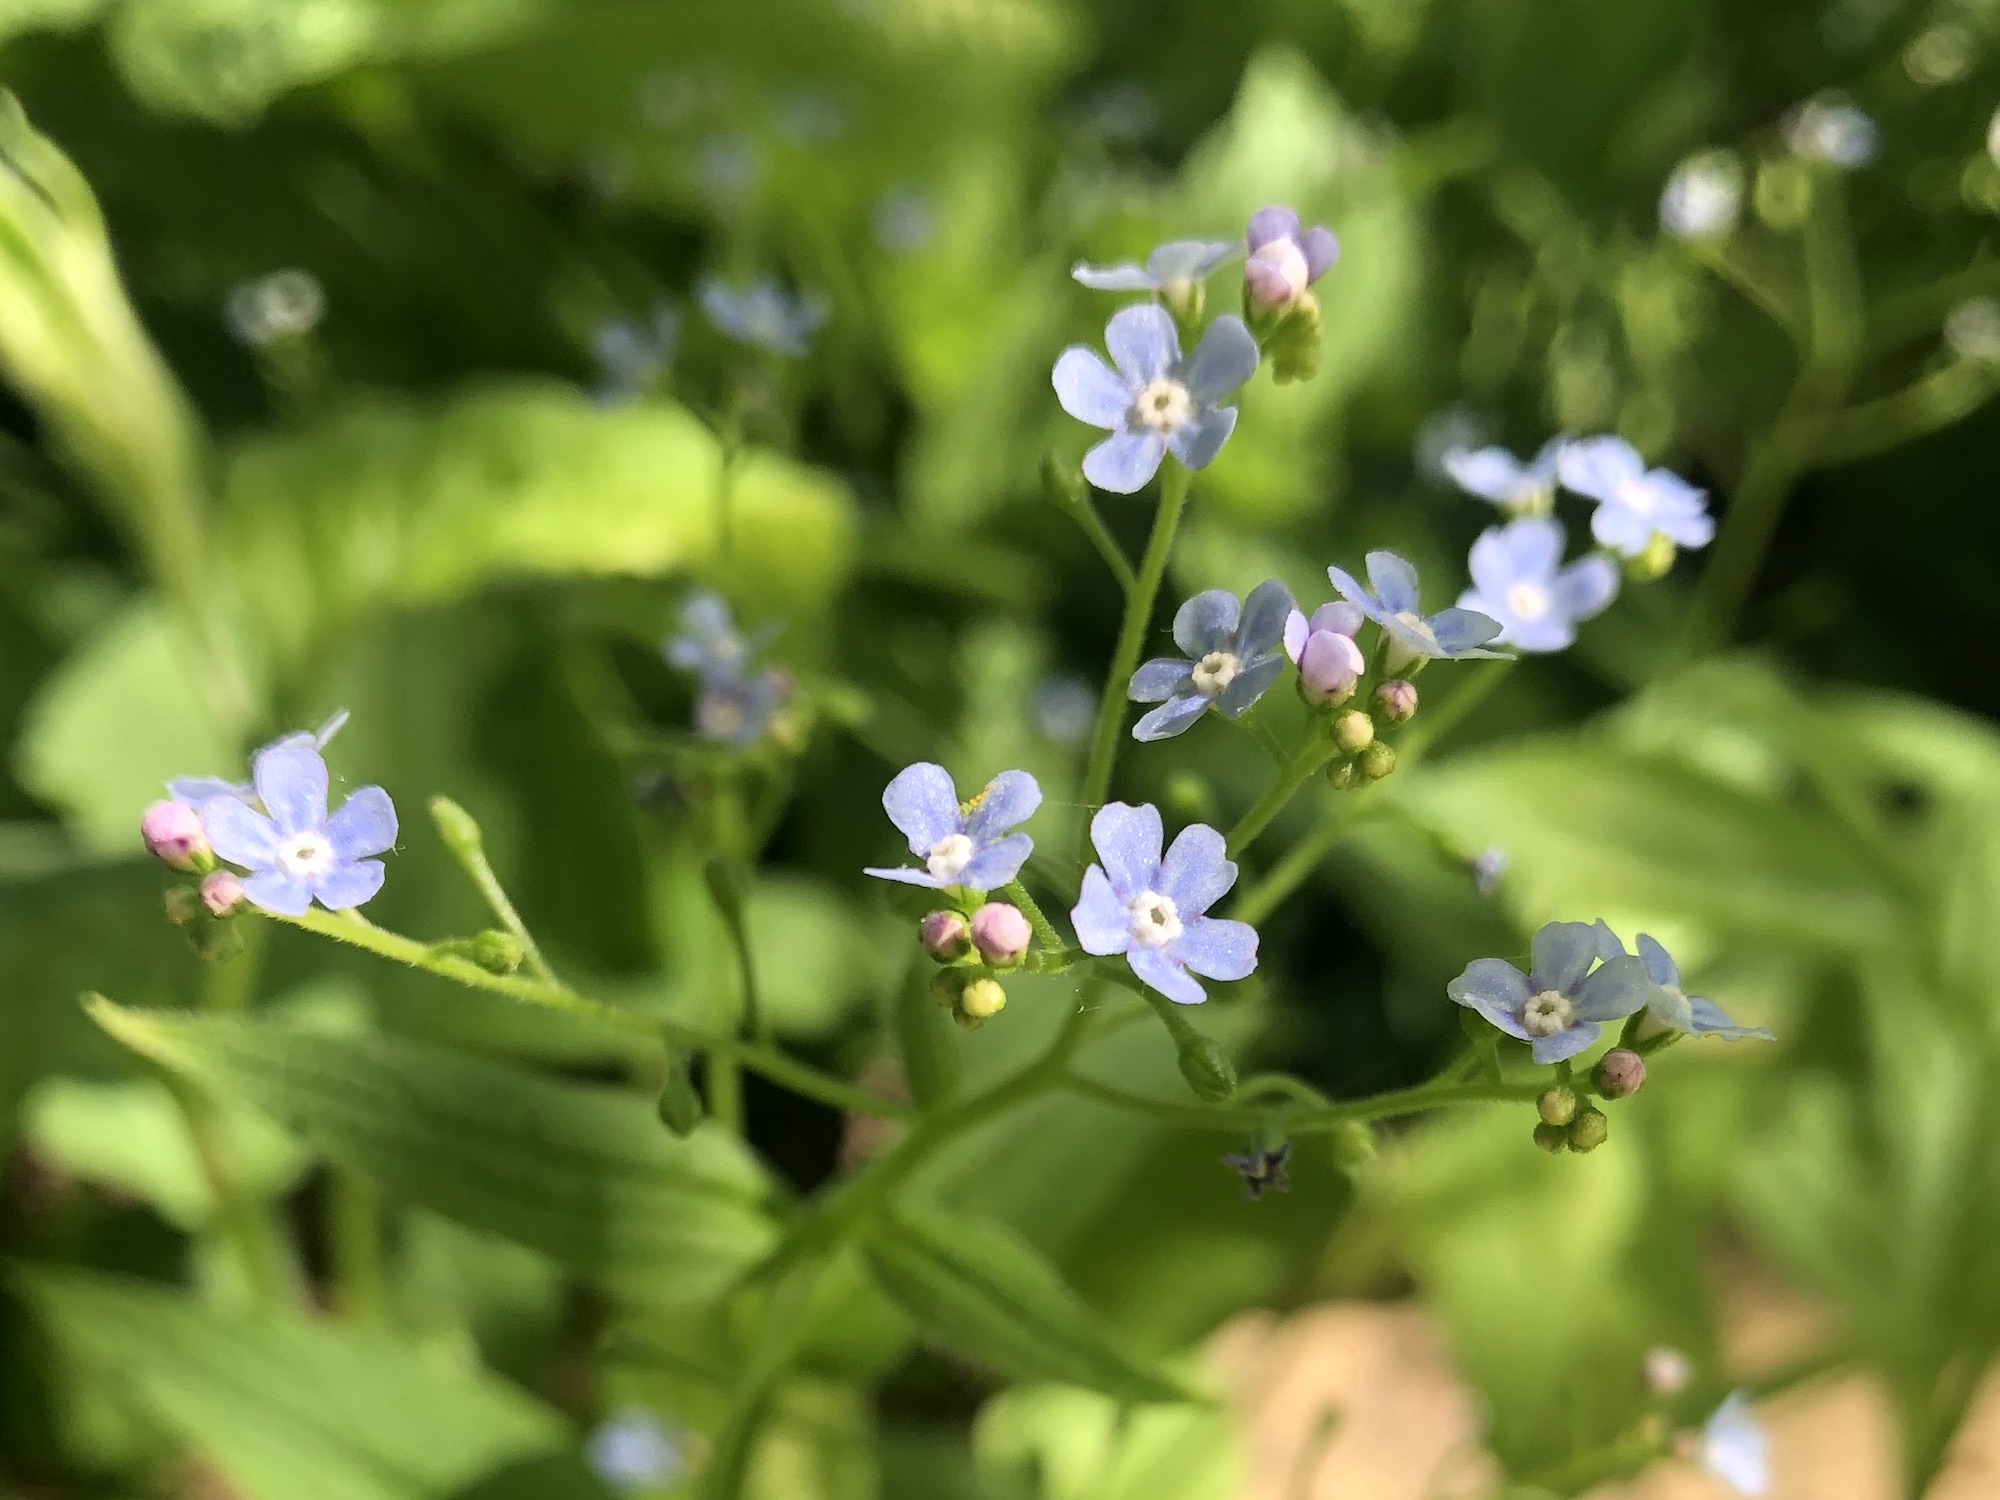 False Forget-Me-Not in the Thoreau Rain Garden in Madison, Wisconsin on May 16, 2022.